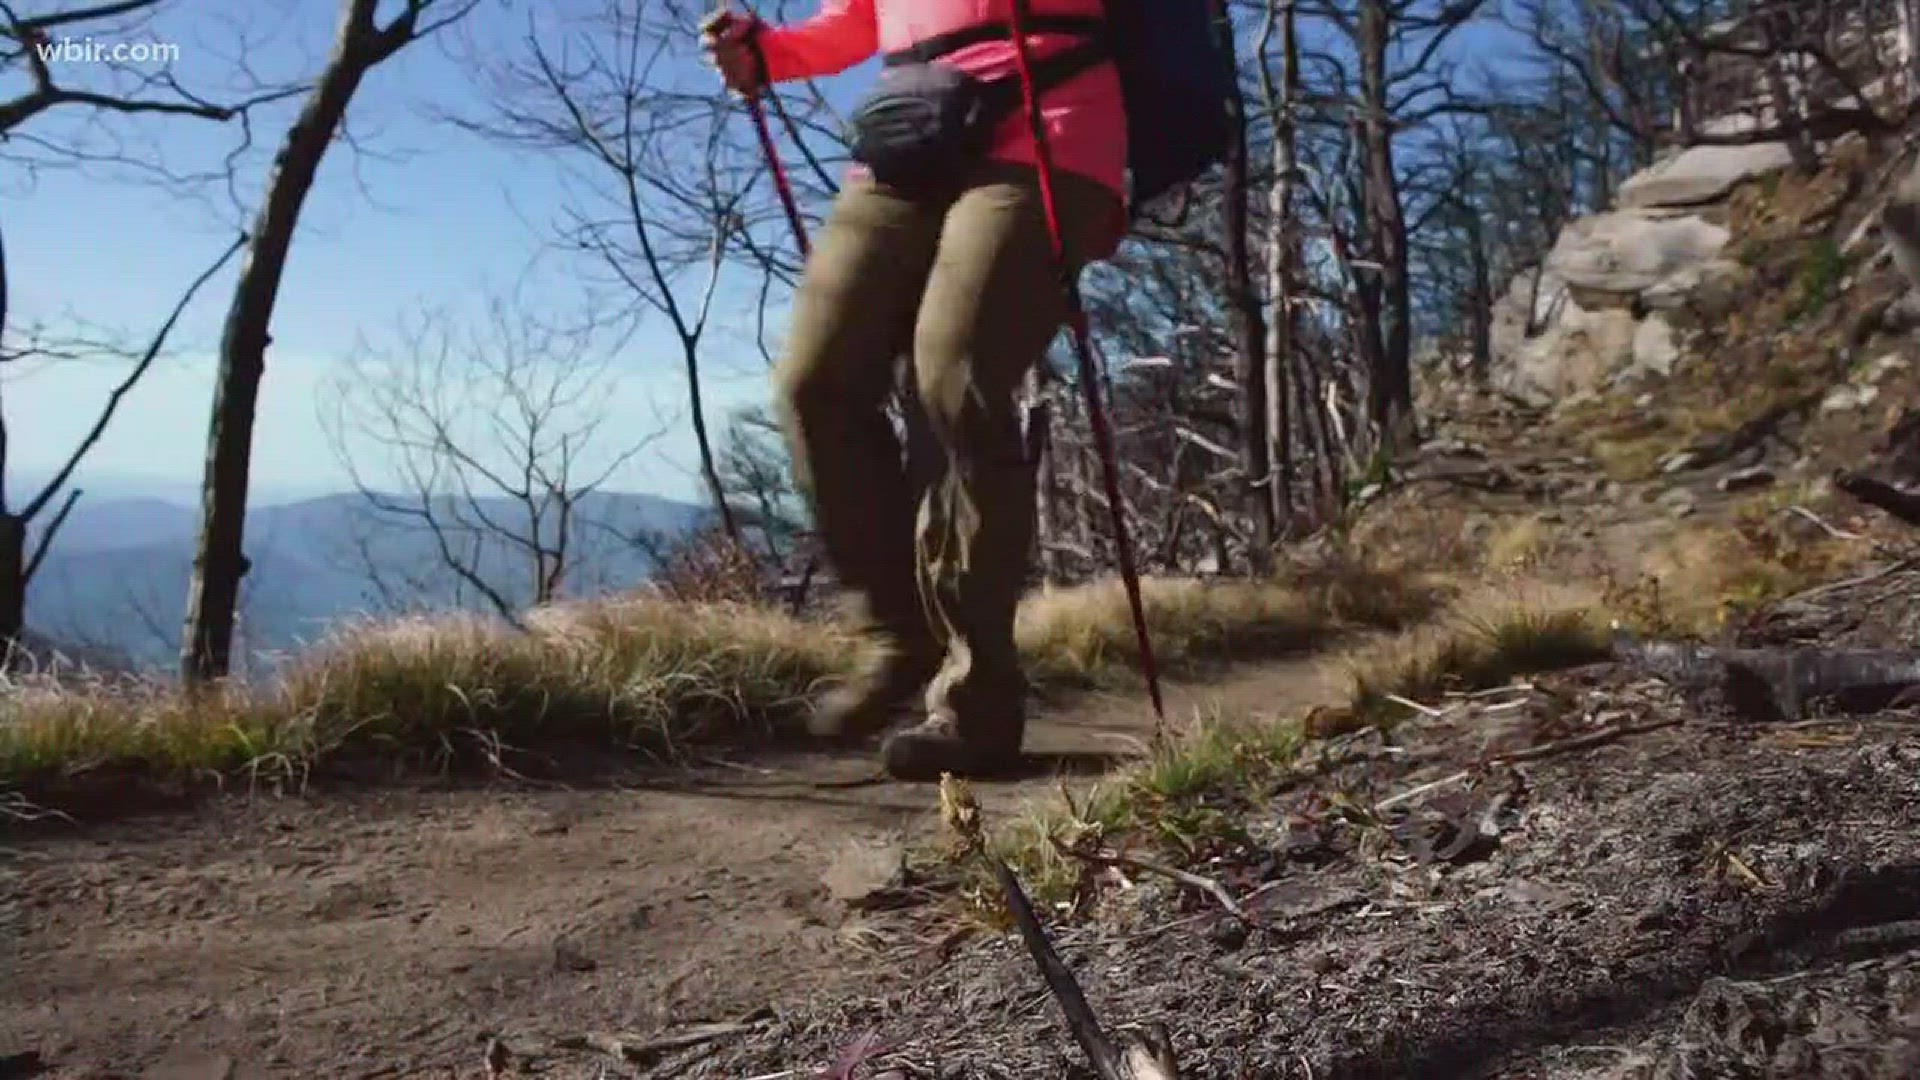 For many hikers, joining the great smoky mountains 900 mile club is a feat all of its own.
For Benny Braden, his record 78 days last winter wasn't enough.